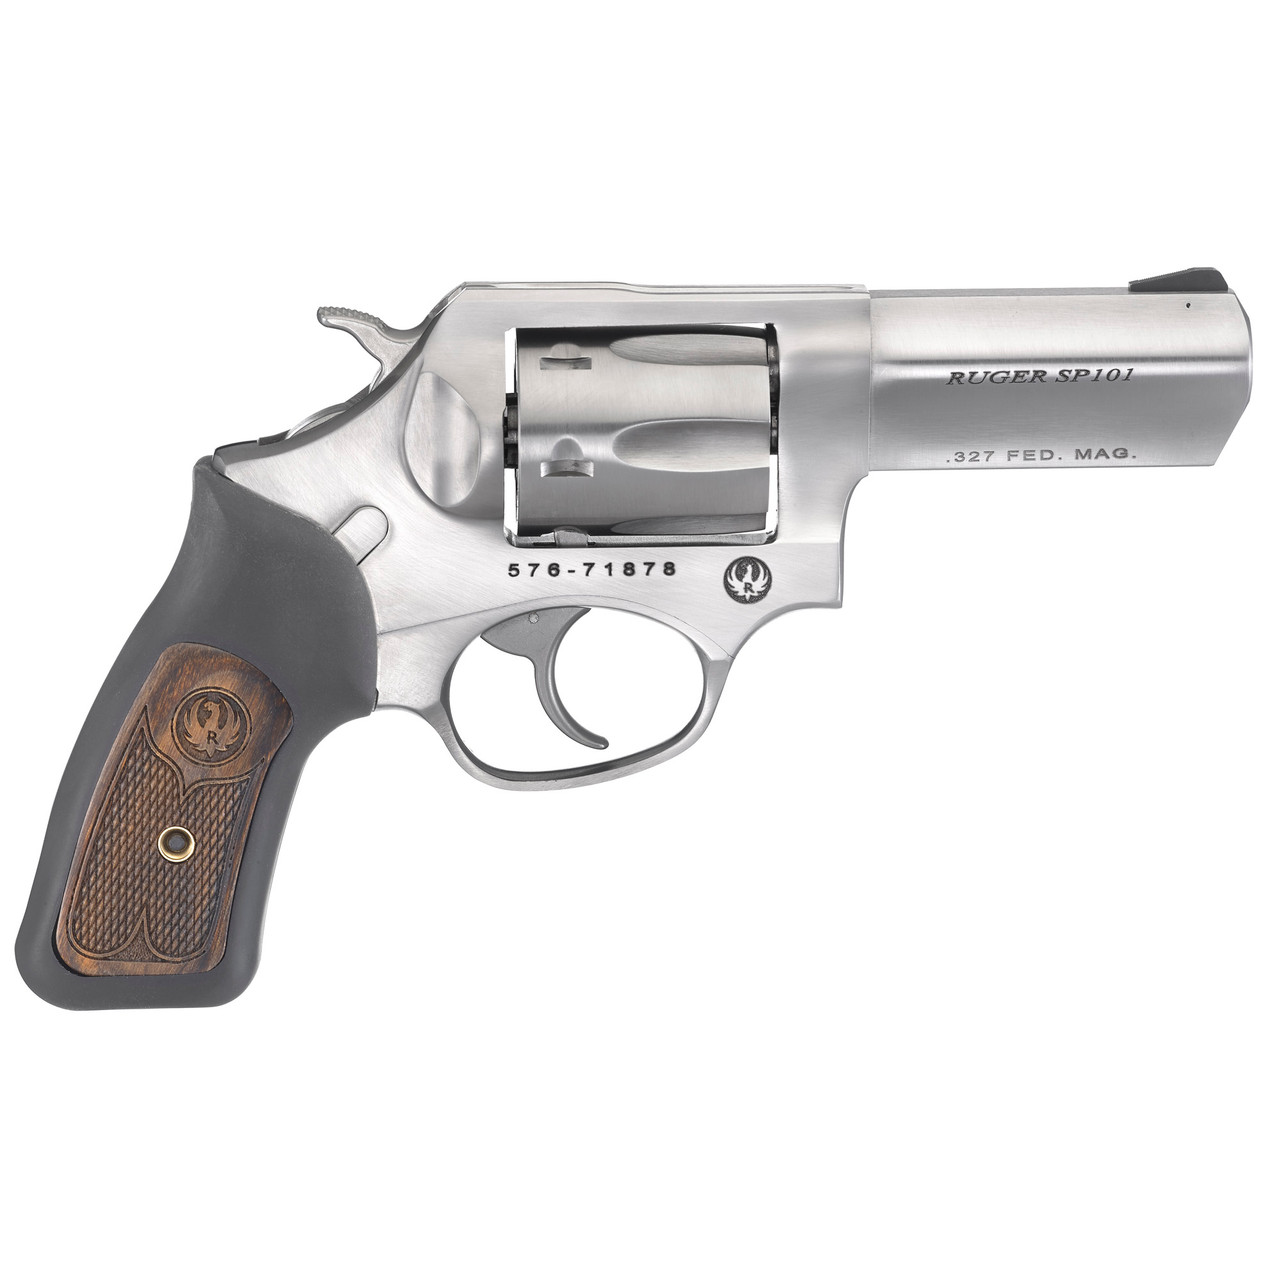 Ruger SP101 3" CALIFORNIA LEGAL - .327 Federal Magnum - Stainless